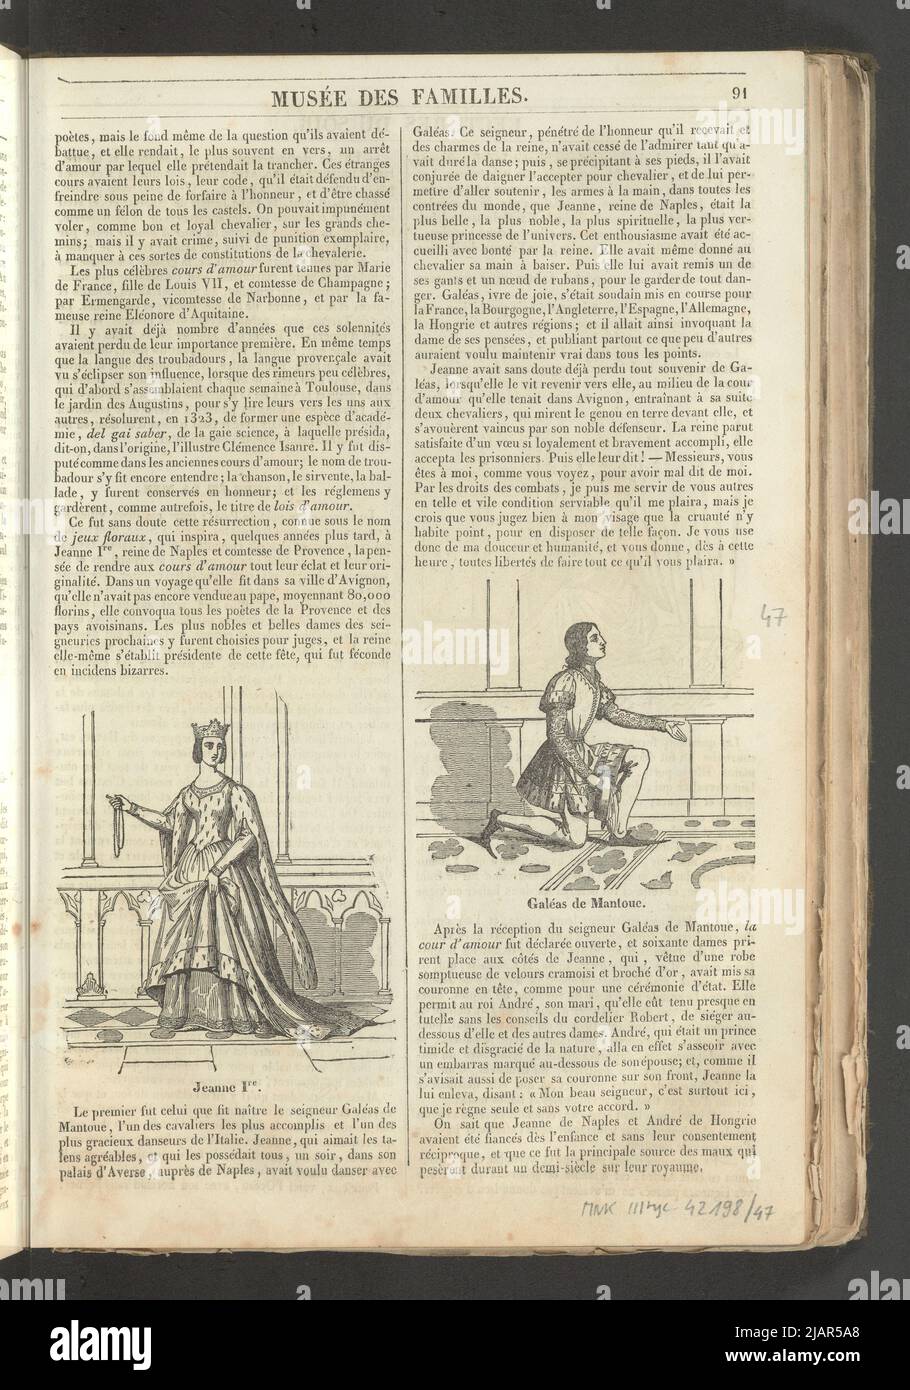 Notebook 12, December1833 Queen Joanna I, Galeas de Montoue, Lady de Marchebruuse, Three Illustrations for the article Sketches of the Middle Ages by Leon Guerin in: Museum of families, evening reading. T. 1. (Year 1 and 2) Paris, [1833 1834]. unknown Stock Photo